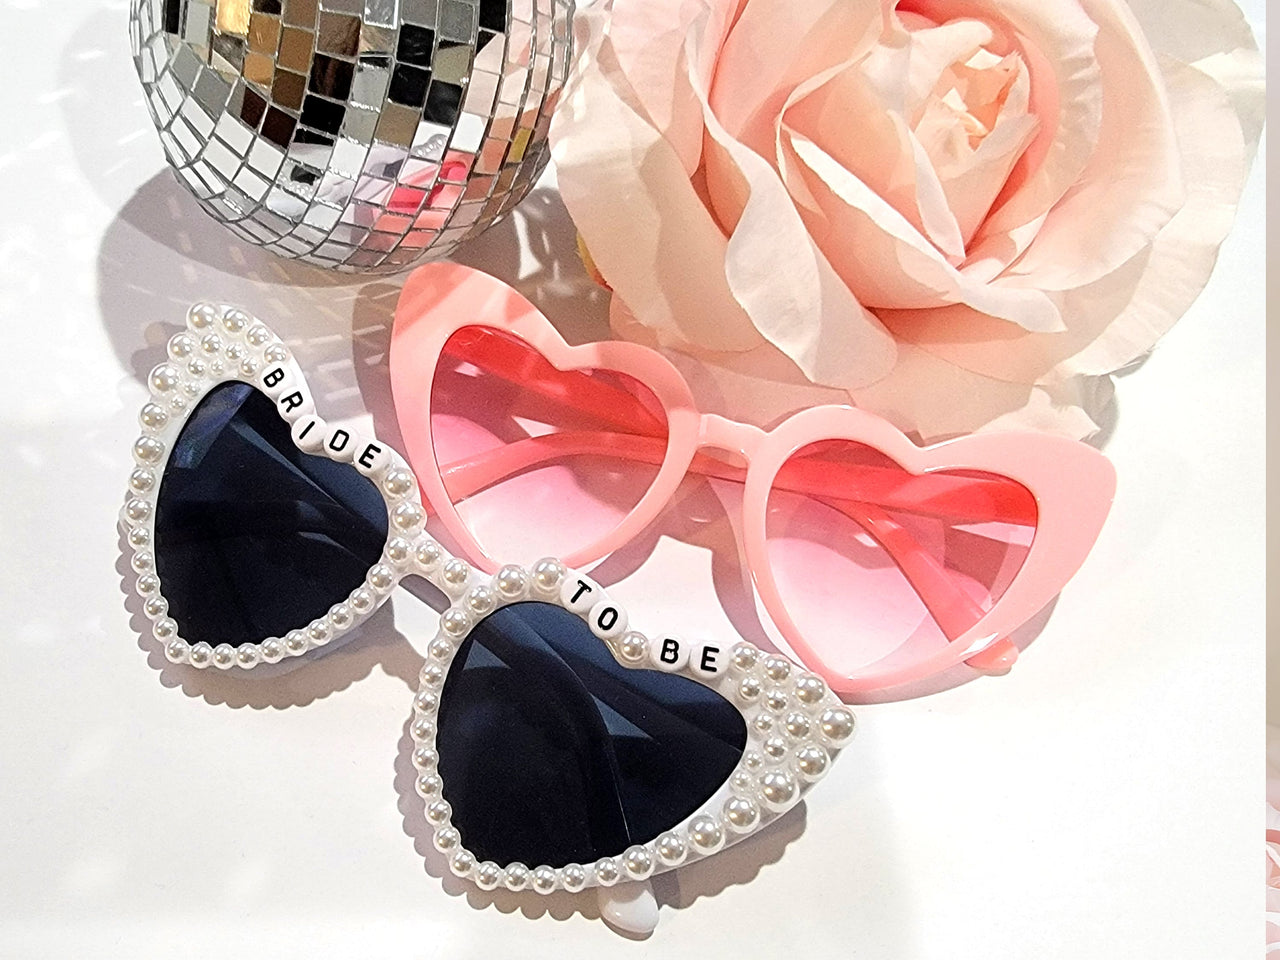 Bride to Be Heart Sunglasses with Pearls and Pink Retro Bridesmaid Sunglasses